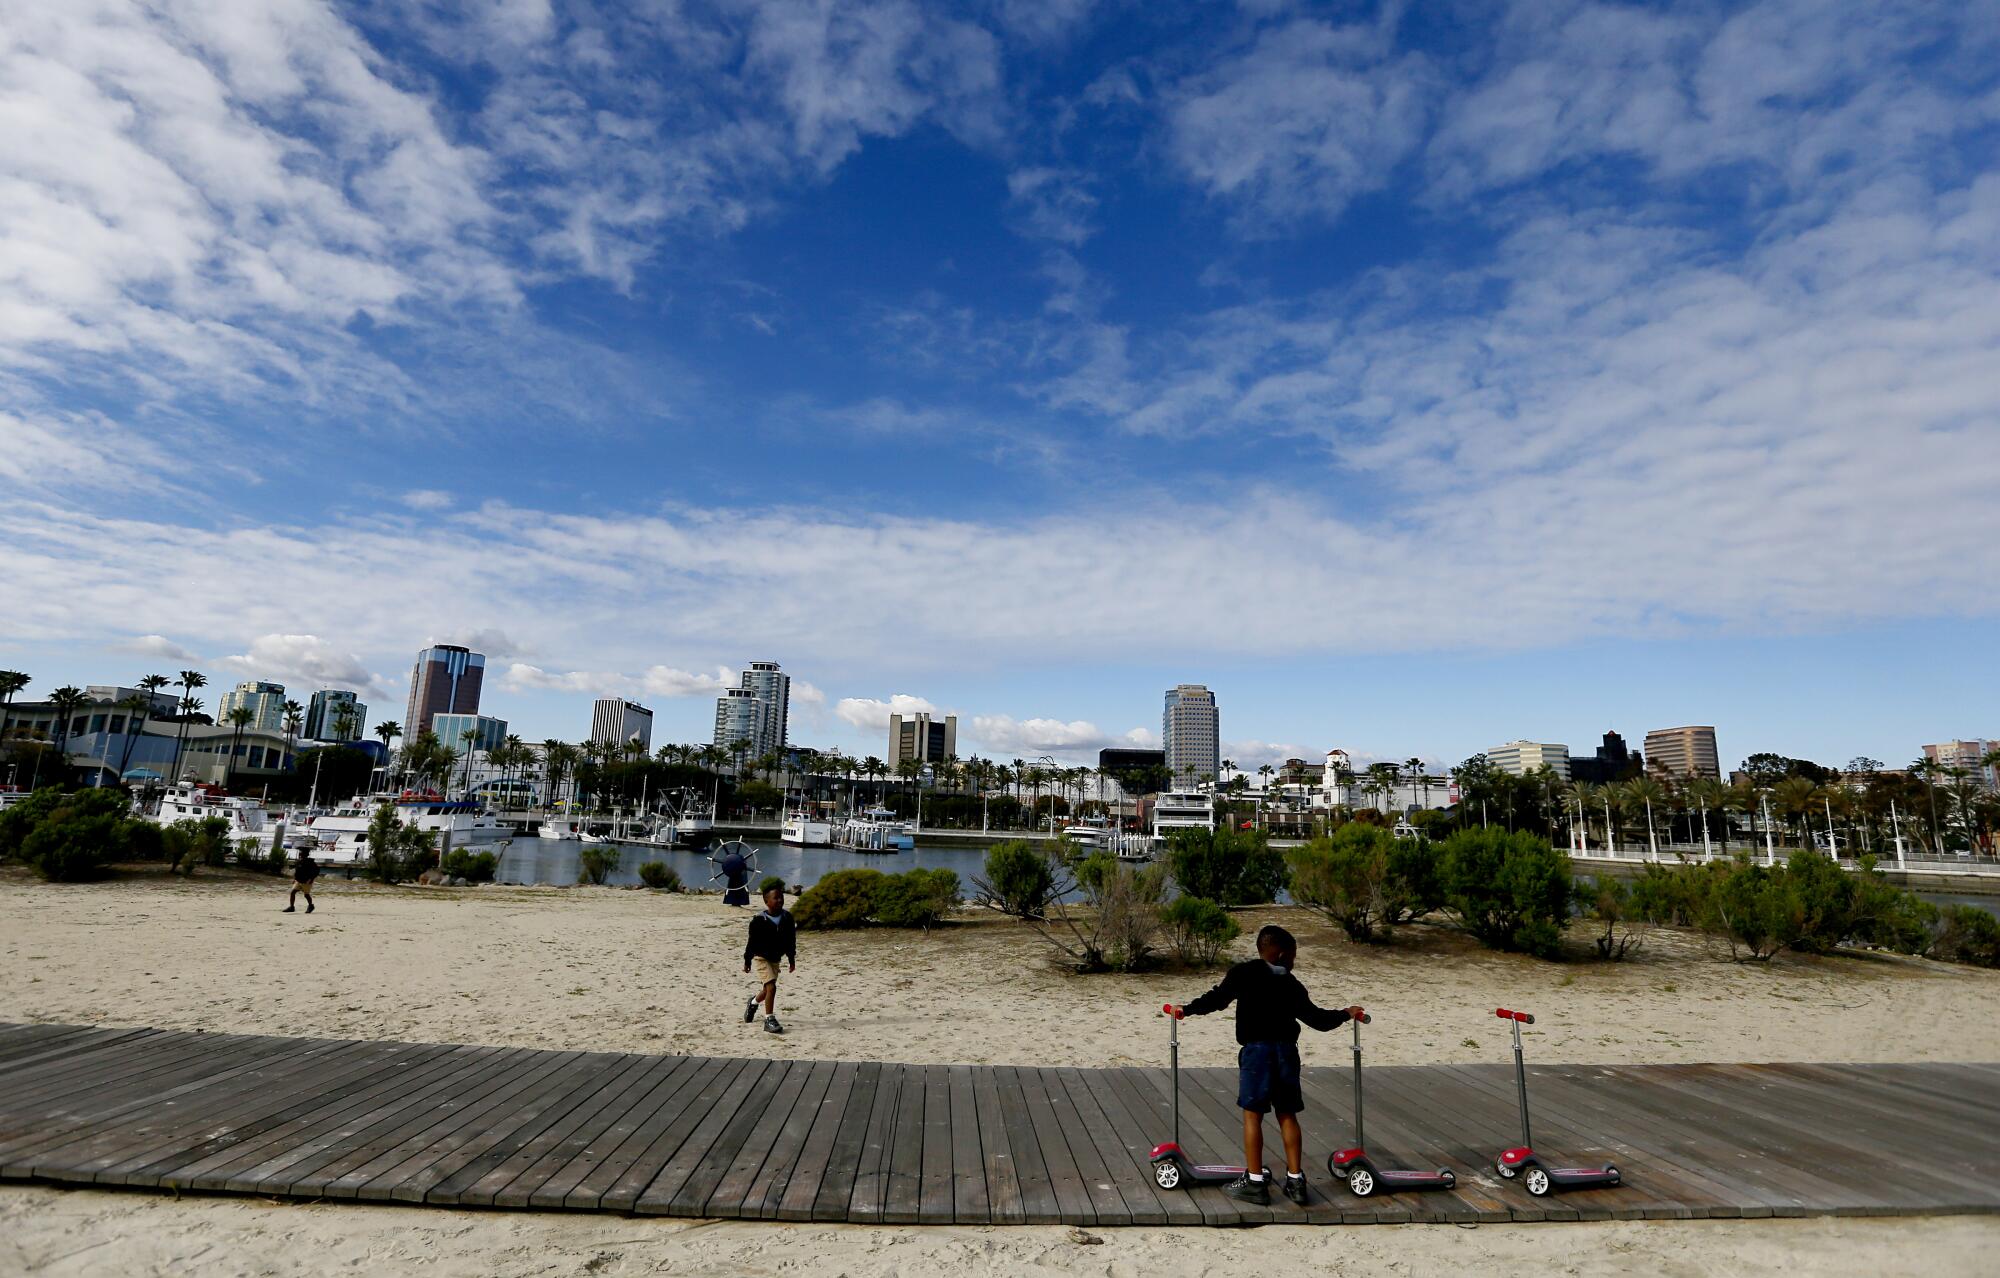 Children play on a deserted beach in downtown Long Beach